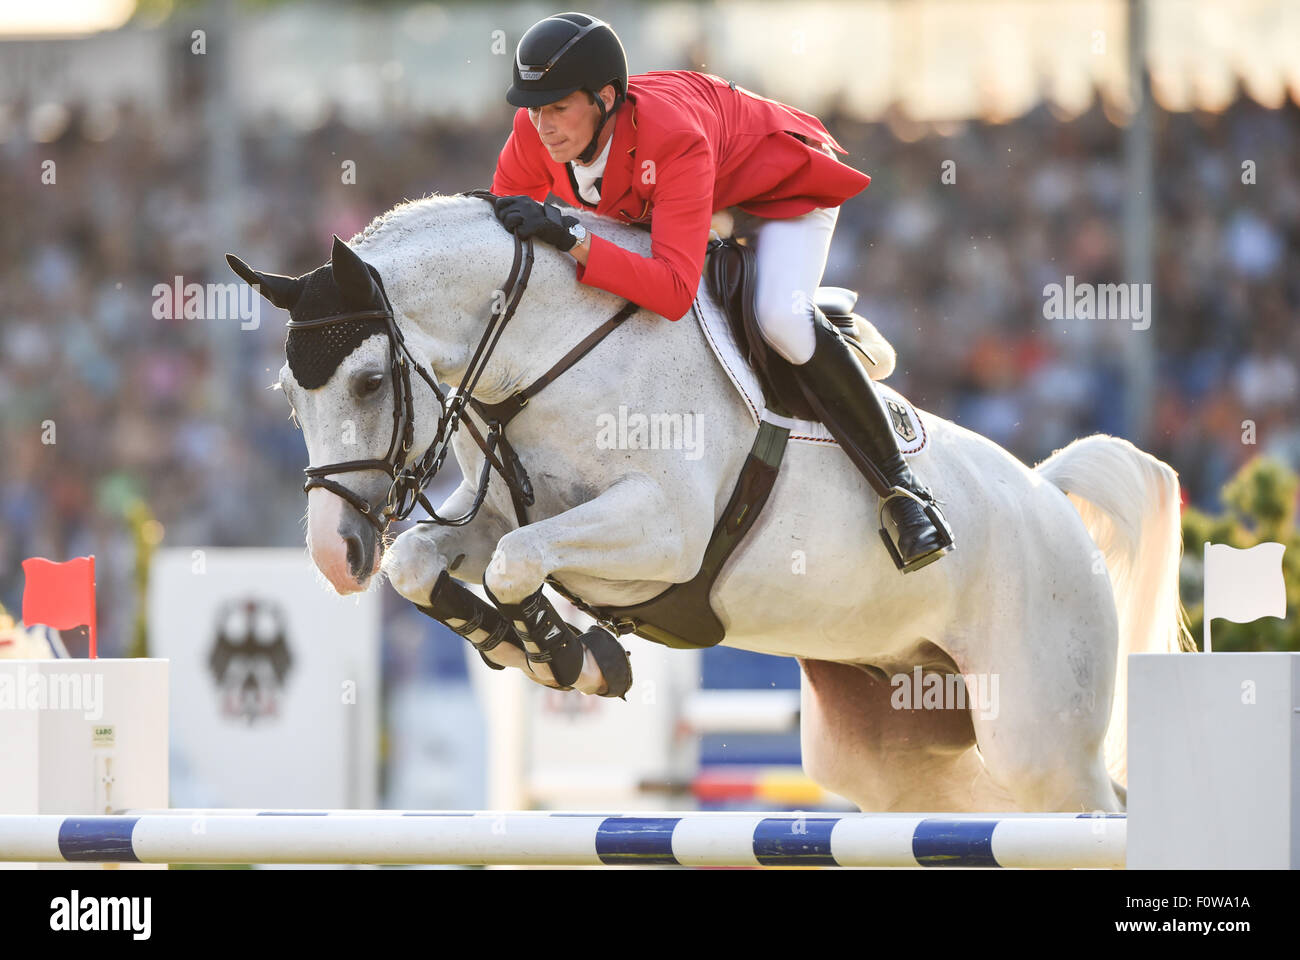 Aachen, Germany. 21st Aug, 2015. Daniel Deusser of Germany jumps with his horse Cornet d'Amour over an obstacle in the third round of the Show Jumping Team Final Competition during the FEI European Championships in Aachen, Germany, 21 August 2015. Photo: Uwe Anspach/dpa/Alamy Live News Stock Photo